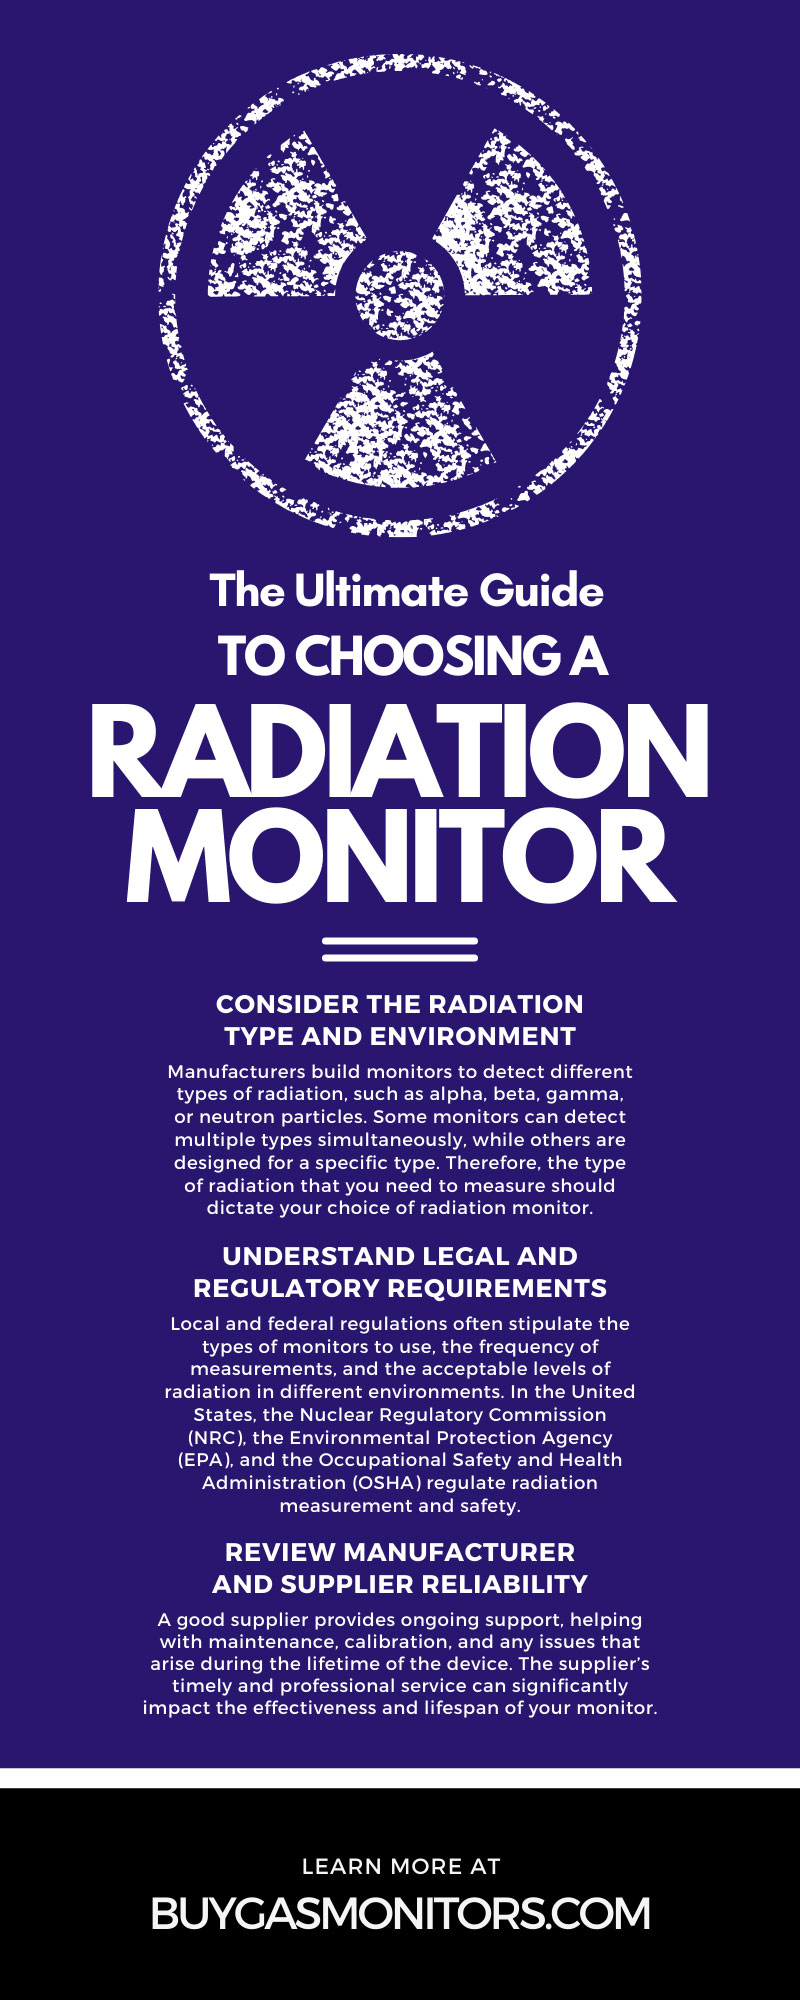 The Ultimate Guide to Choosing a Radiation Monitor